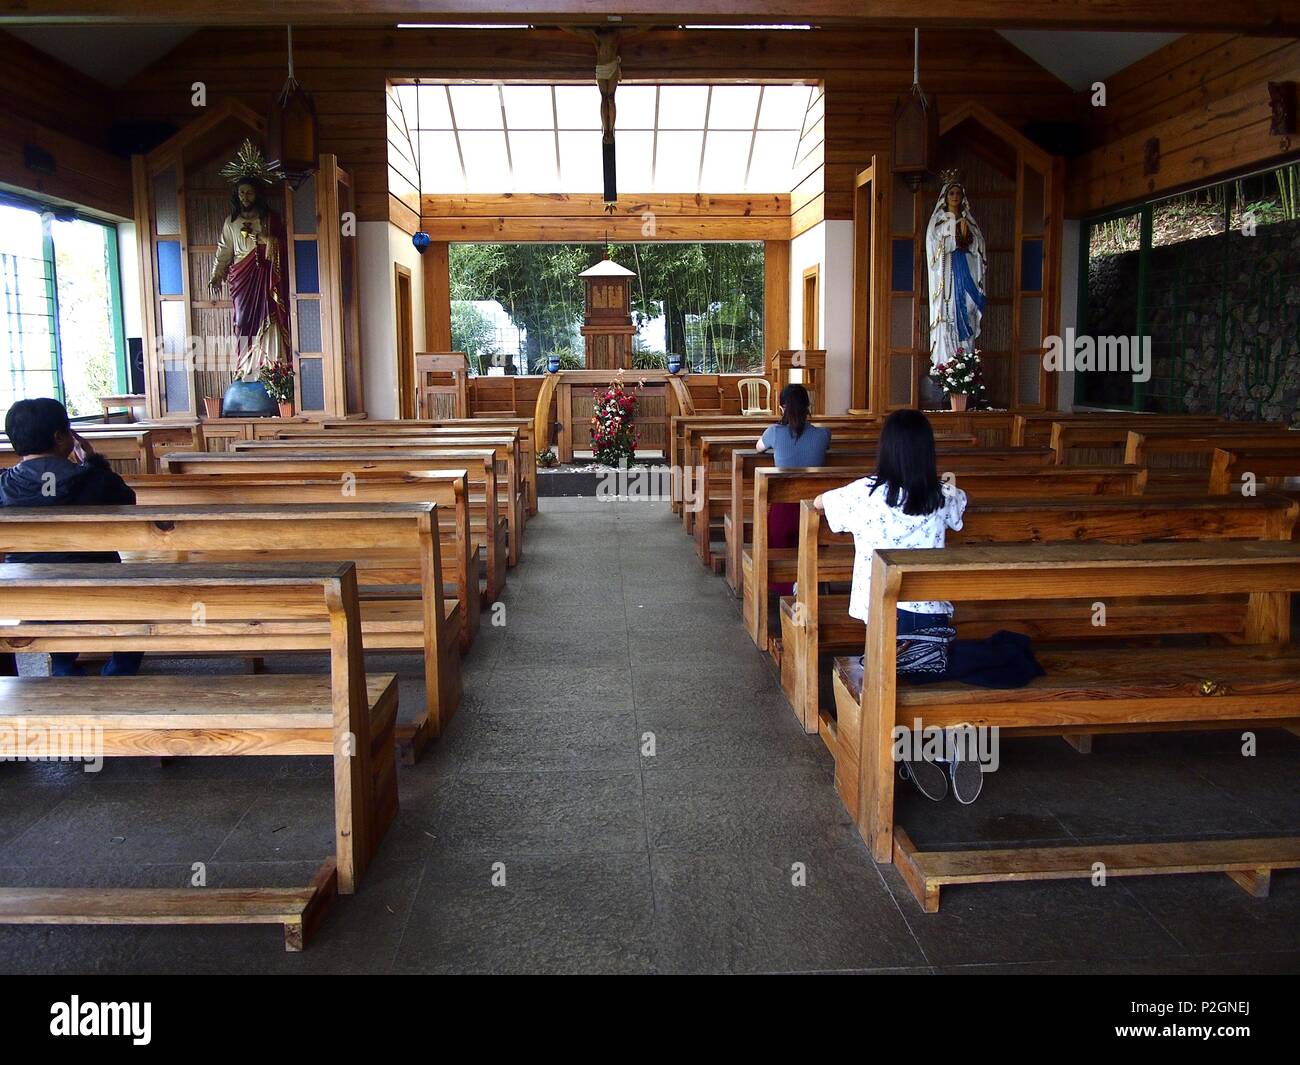 BAGUIO CITY, PHILIPPINES - JUNE 7, 2018: Tourists and visitors pray at a chapel at the Lourdes Grotto, a famous tourist spot in Baguio City, Philippin Stock Photo